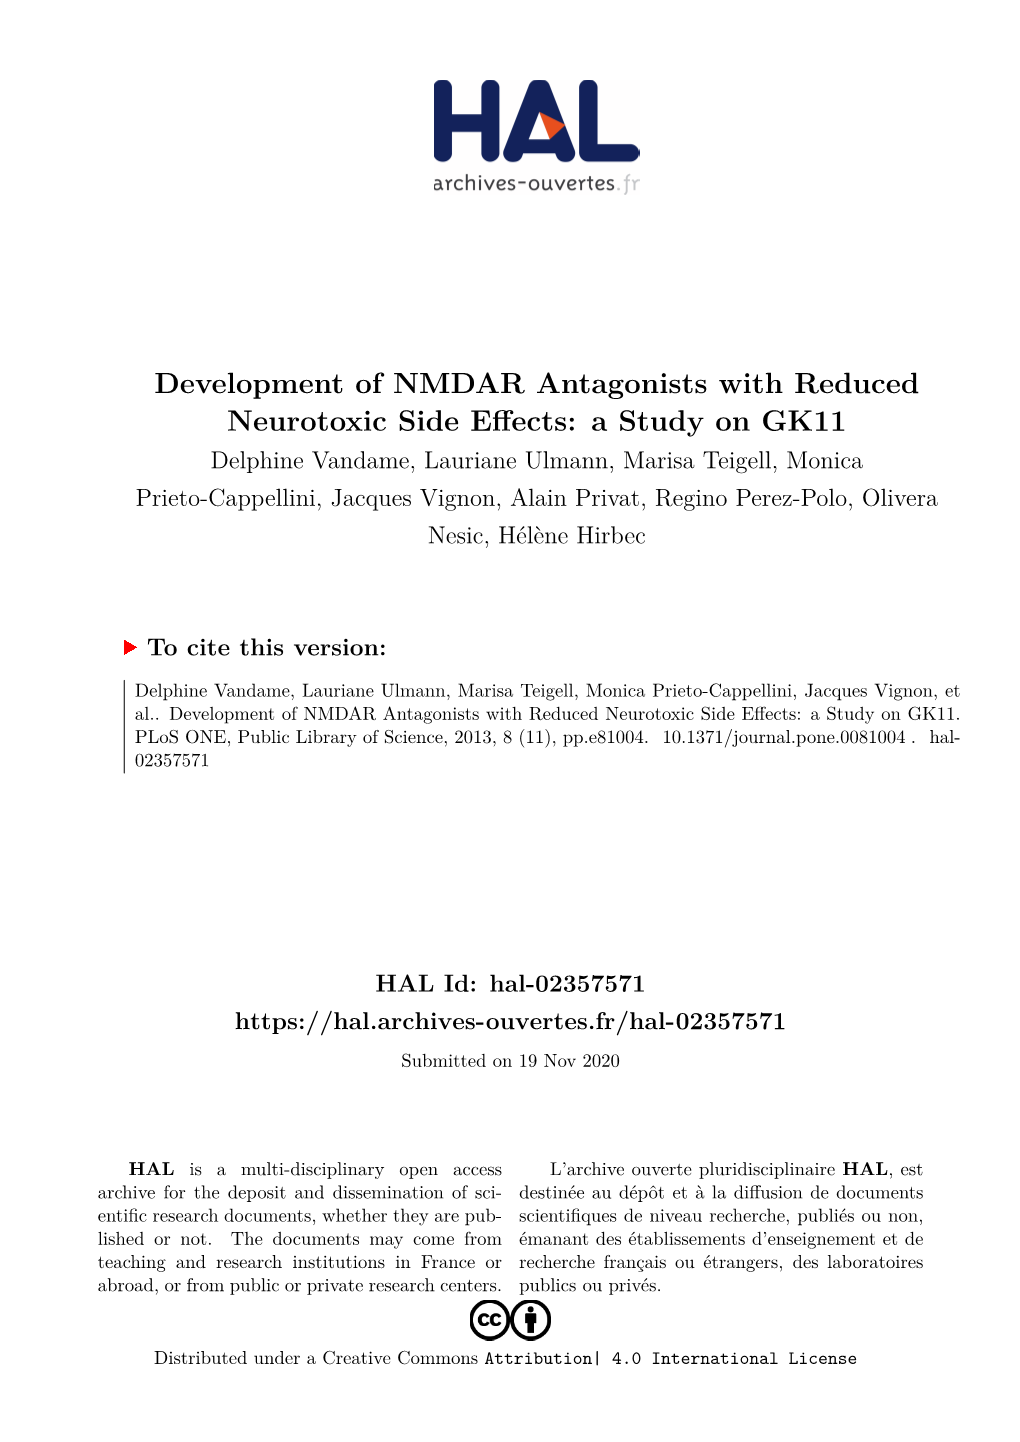 Development of NMDAR Antagonists with Reduced Neurotoxic Side Effects